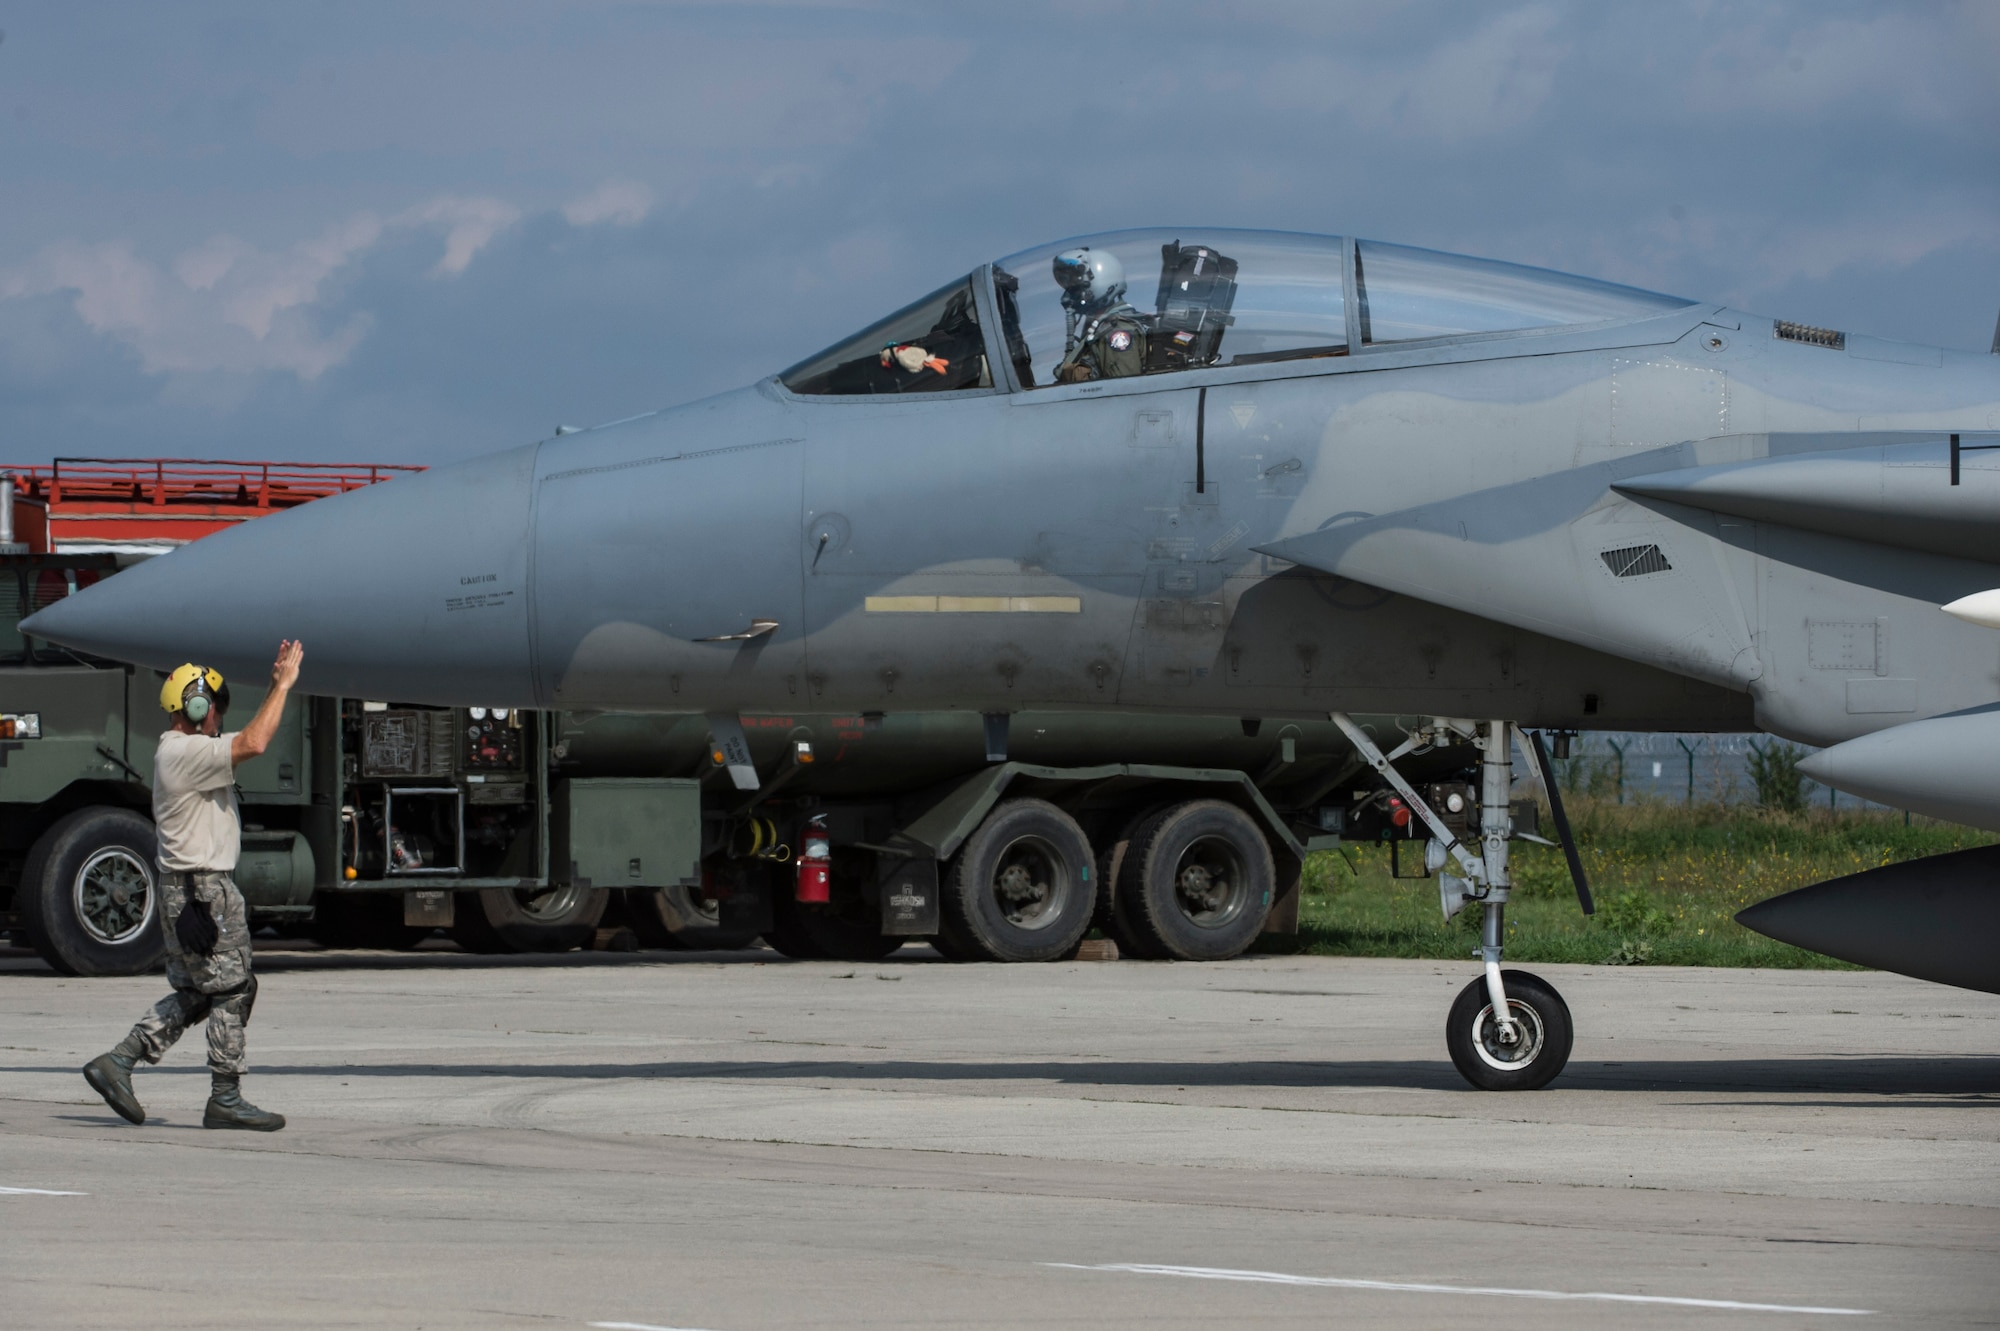 A crew chief from the 123rd Expeditionary Fighter Squadron, 142nd Fighter Wing, Oregon Air National Guard, signals the pilot of an F-15C Eagle fighter aircraft to taxi during a theater security package deployment Sept. 25, 2015, at Campia Turzii, Romania. The aircraft deployed to Romania in support of Operation Atlantic Resolve to bolster air power capabilities while underscoring the U.S. commitment to European security and stability. (U.S. Air Force photo by Staff Sgt. Christopher Ruano/Released)